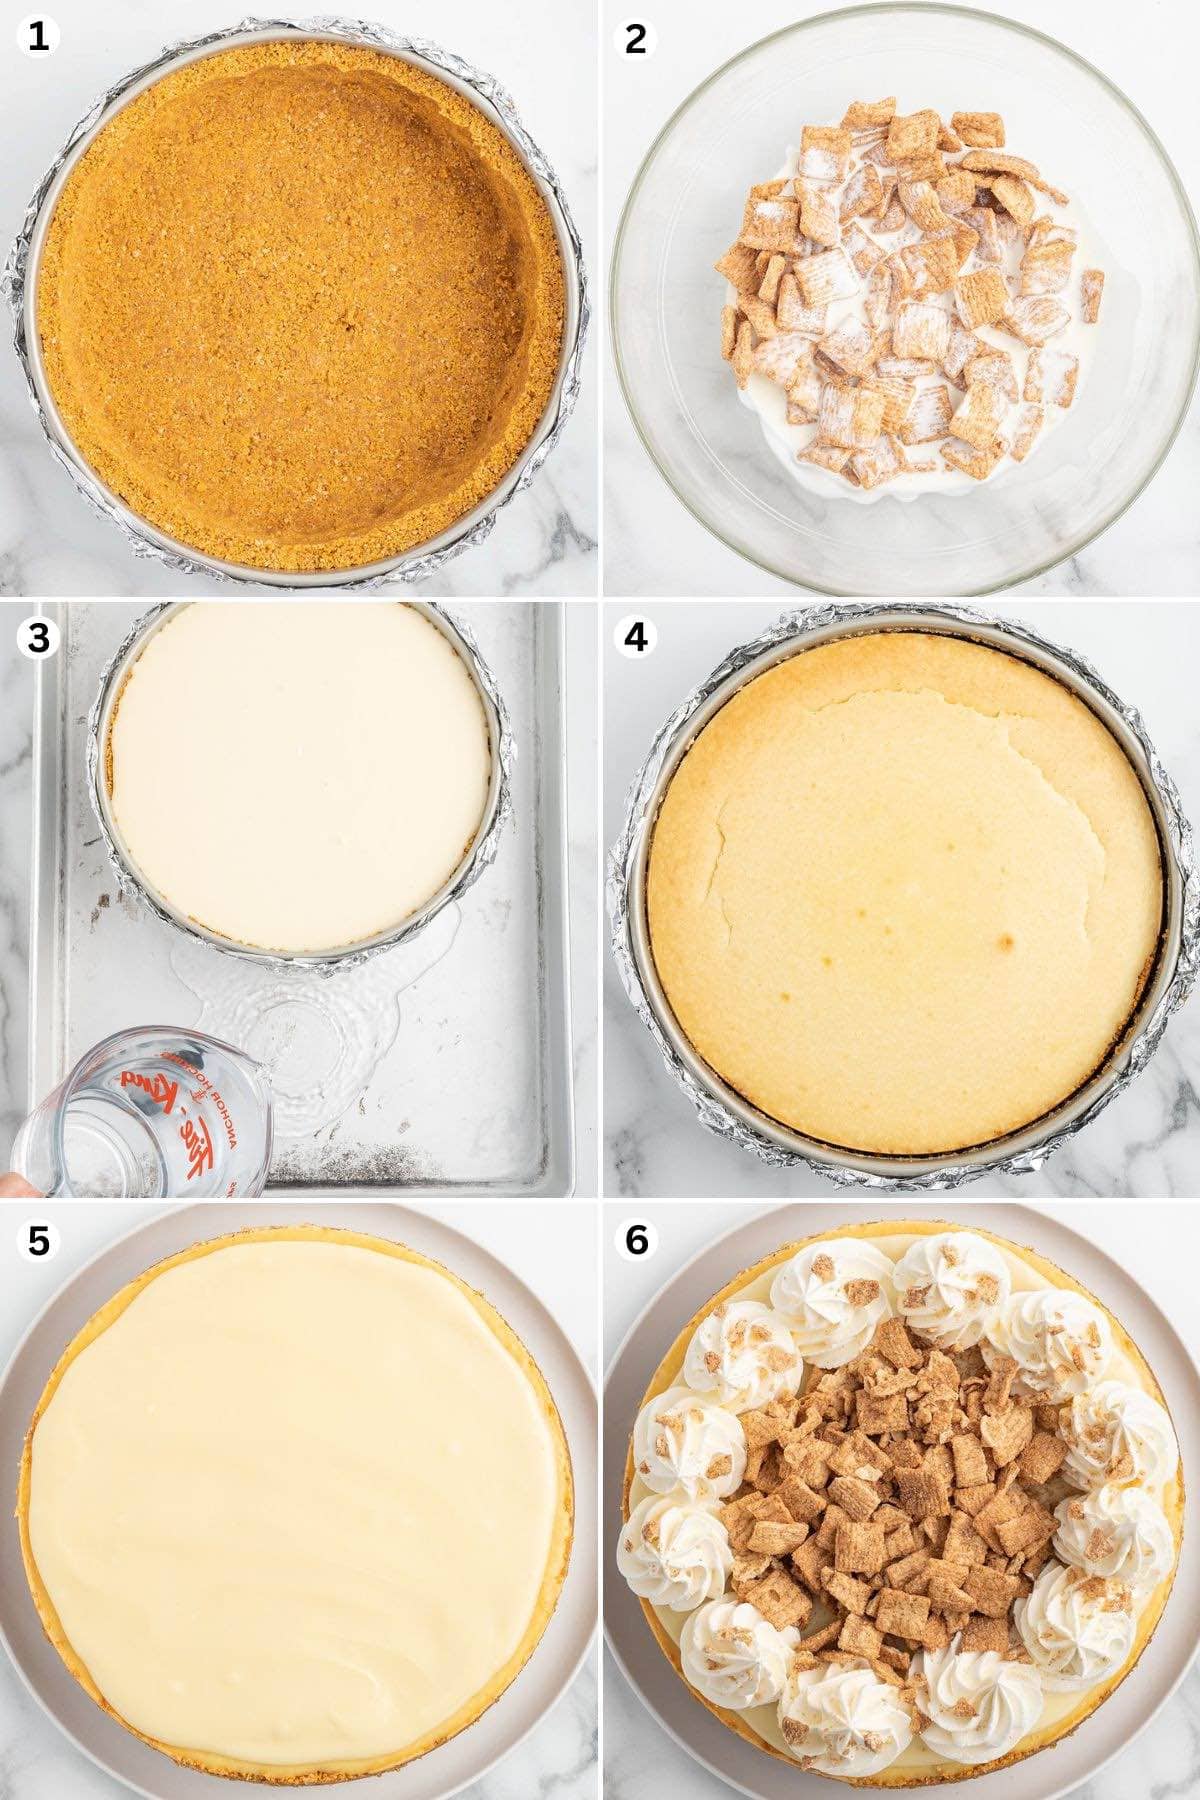 step 1. Create the crust.
step 2. In a small bowl, combine the cinnamon toast crunch and heavy cream.
step 3. Slowly pour the cheesecake filling into the crust.
step 4. Bake the cheesecake.
step 5. Remove the cheesecake from the pan and put it in a plate.
step 6. Decorate the cheesecake and pour the cinnamon toast crunch at the center.